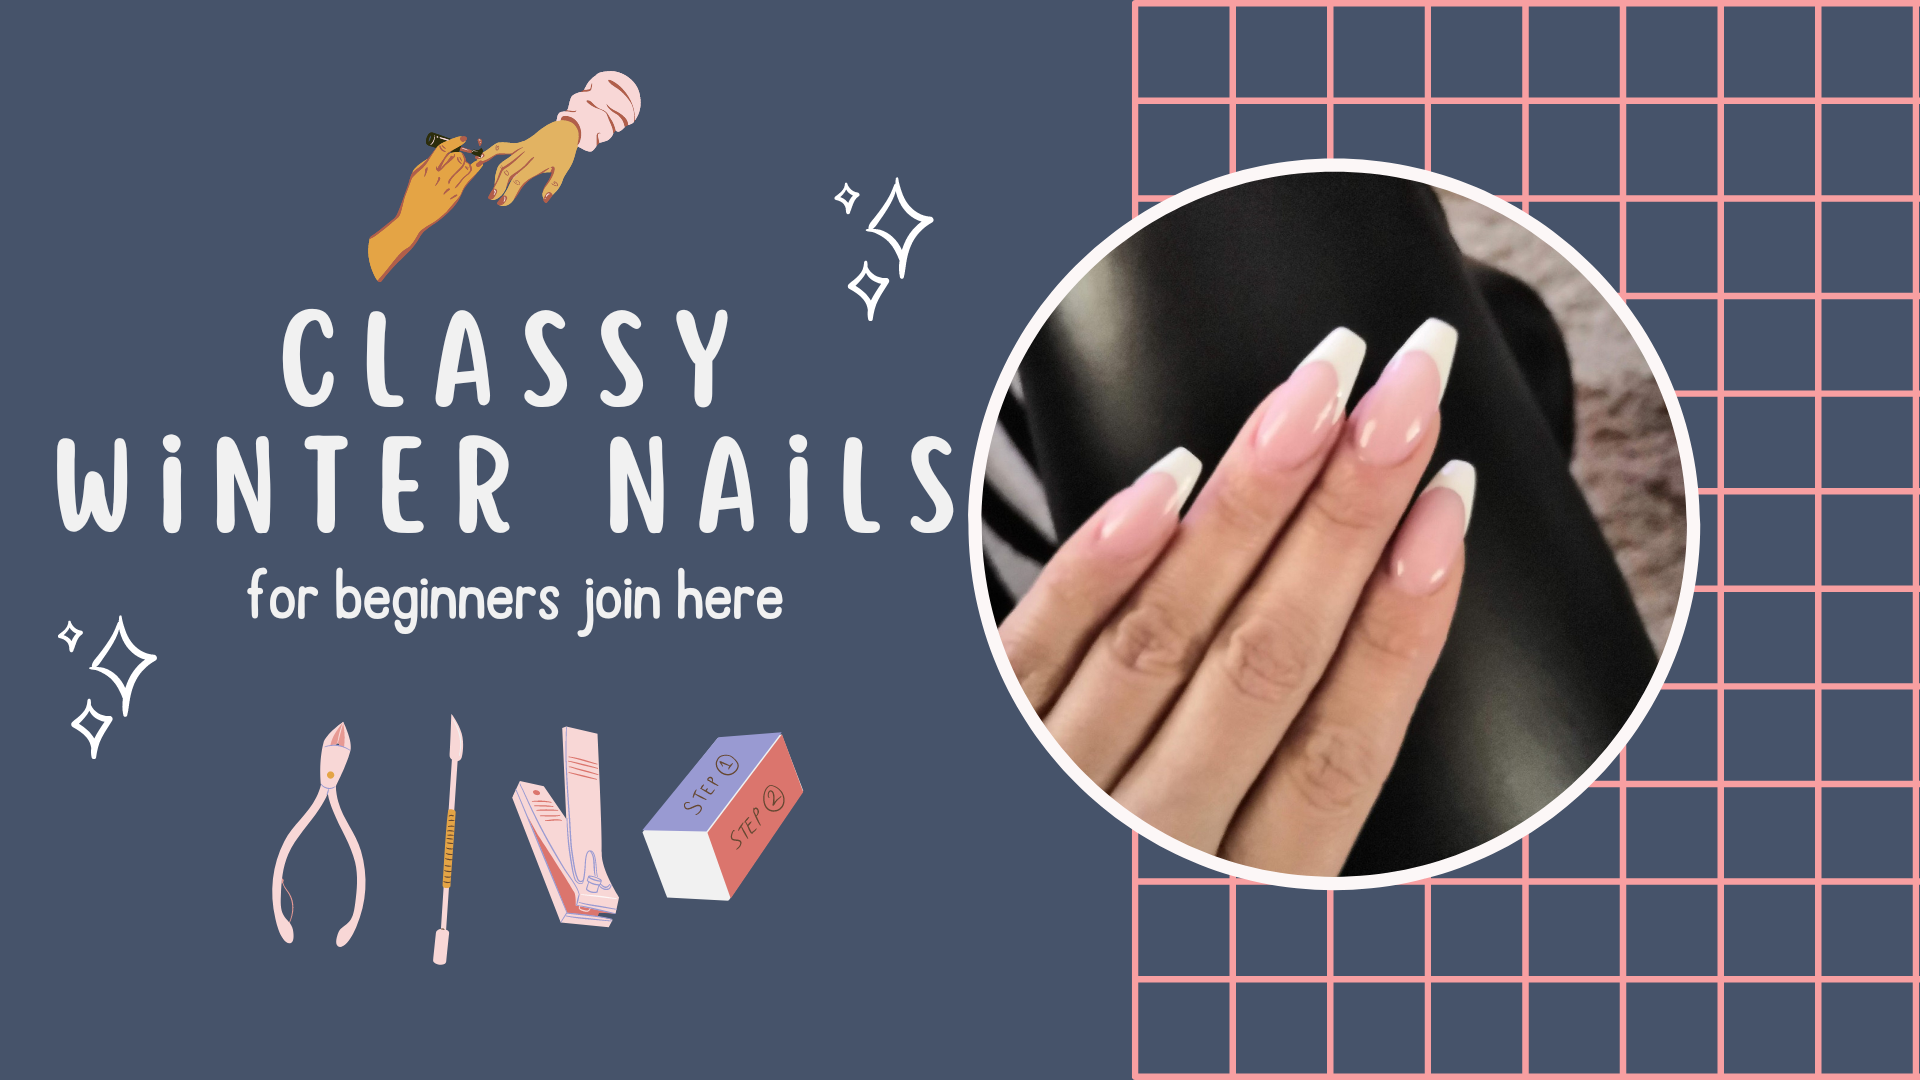 Classy Winter Nails: Frosty Tips with a Dash of Sass!